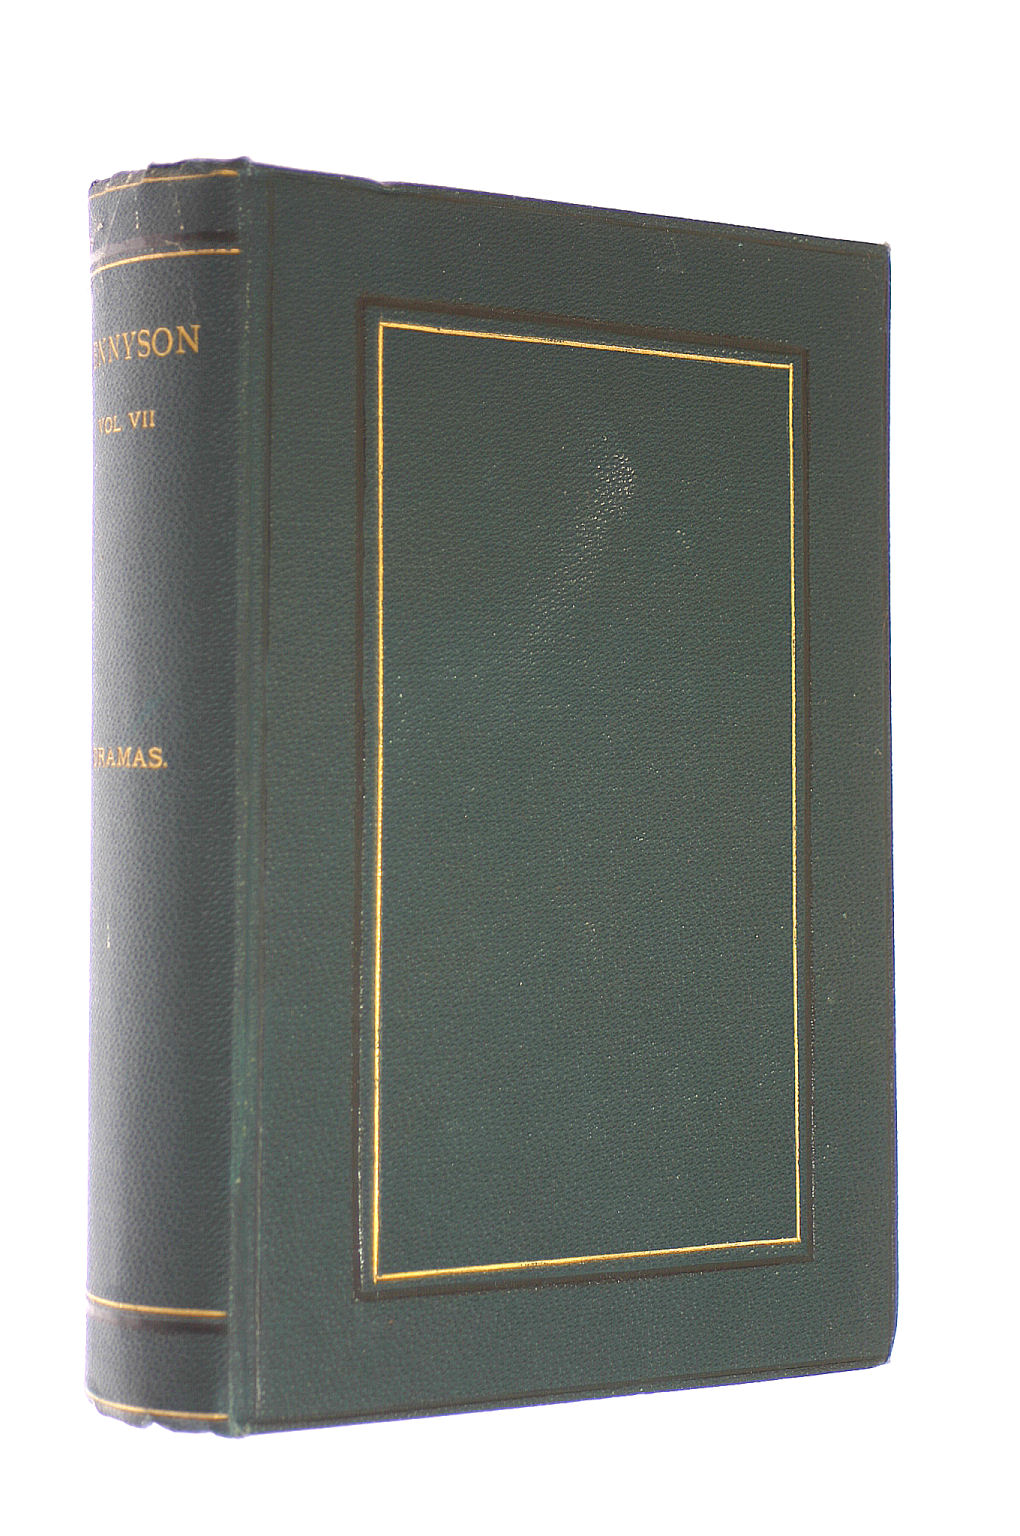 TENNYSON, ALFRED. - The Poetical Works Of Alfred Tennyson Volume VII: Queen Mary - A Drama; Harold - A Drama.